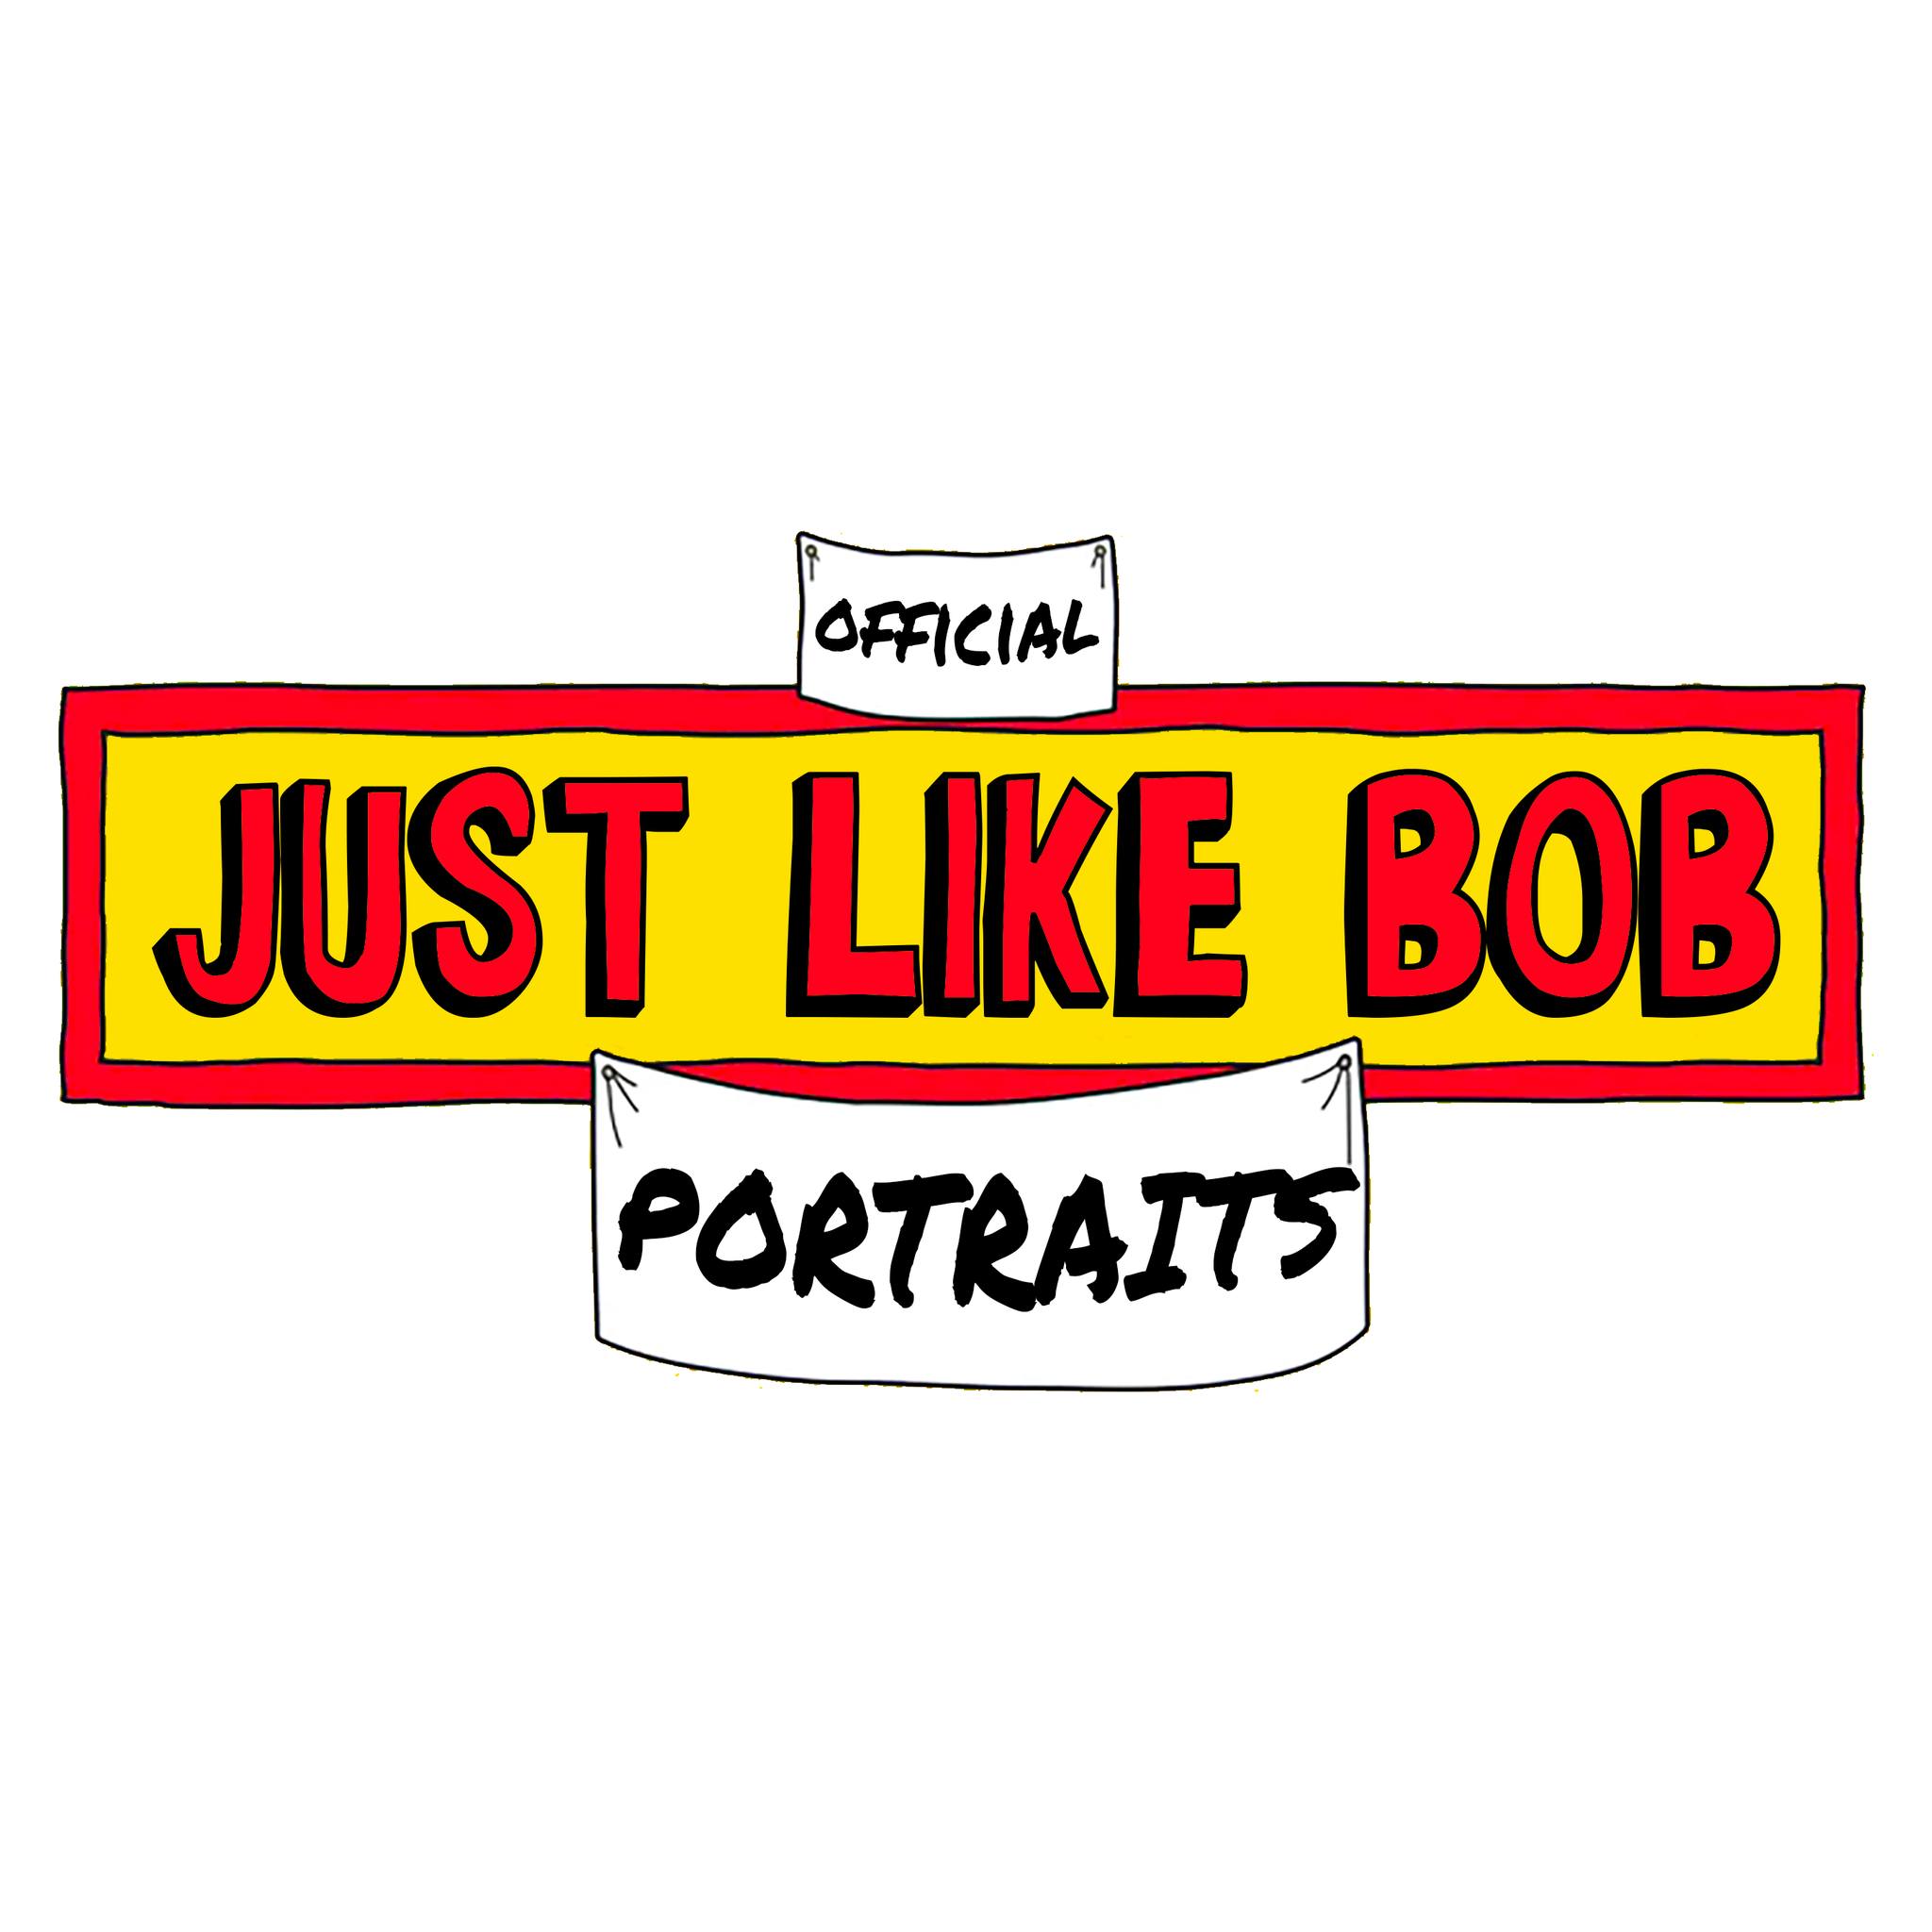 10% Off your entire purchase on Just Like Bob